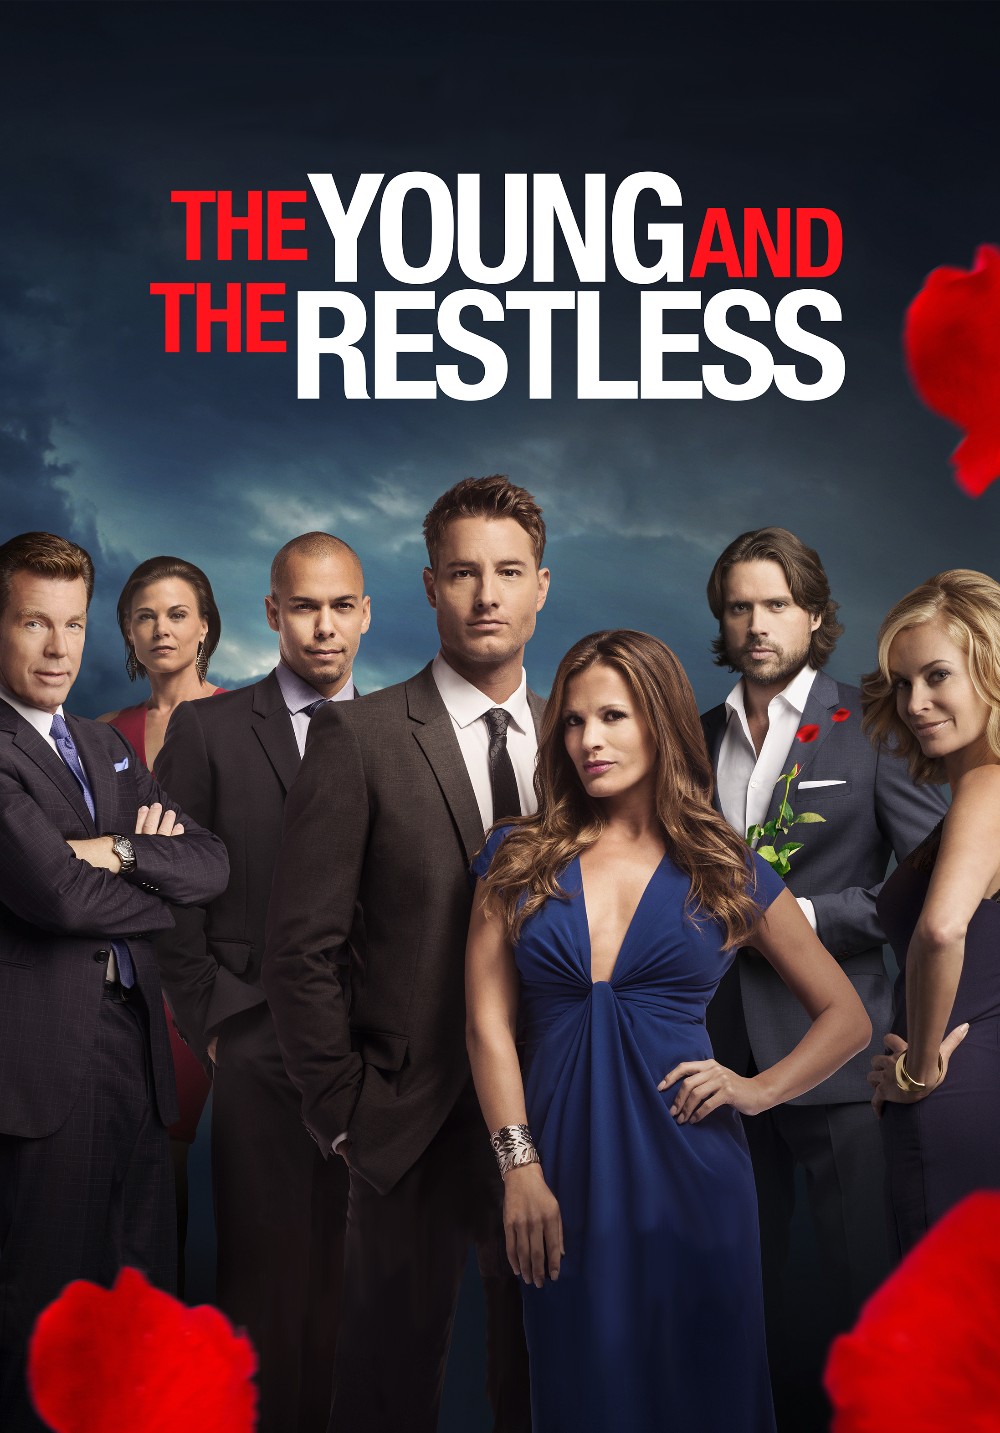 The Young And The Restless S51E65 [1080p] (x265) 9ddcba6f9eeaf10b551e4f52ee0f1366